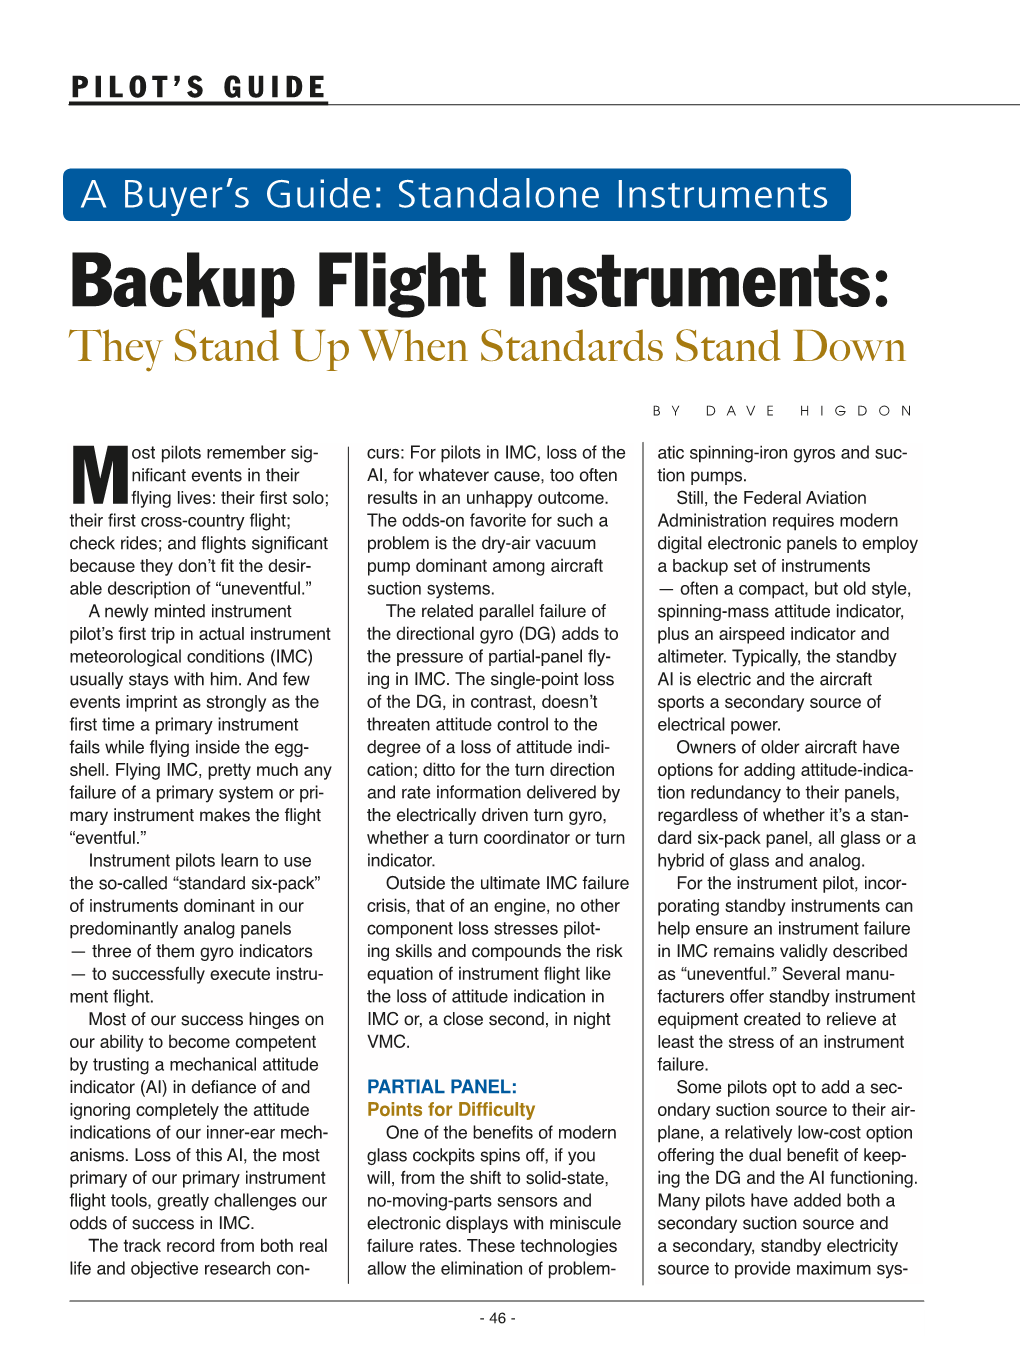 Backup Flight Instruments: They Stand up When Standards Stand Down